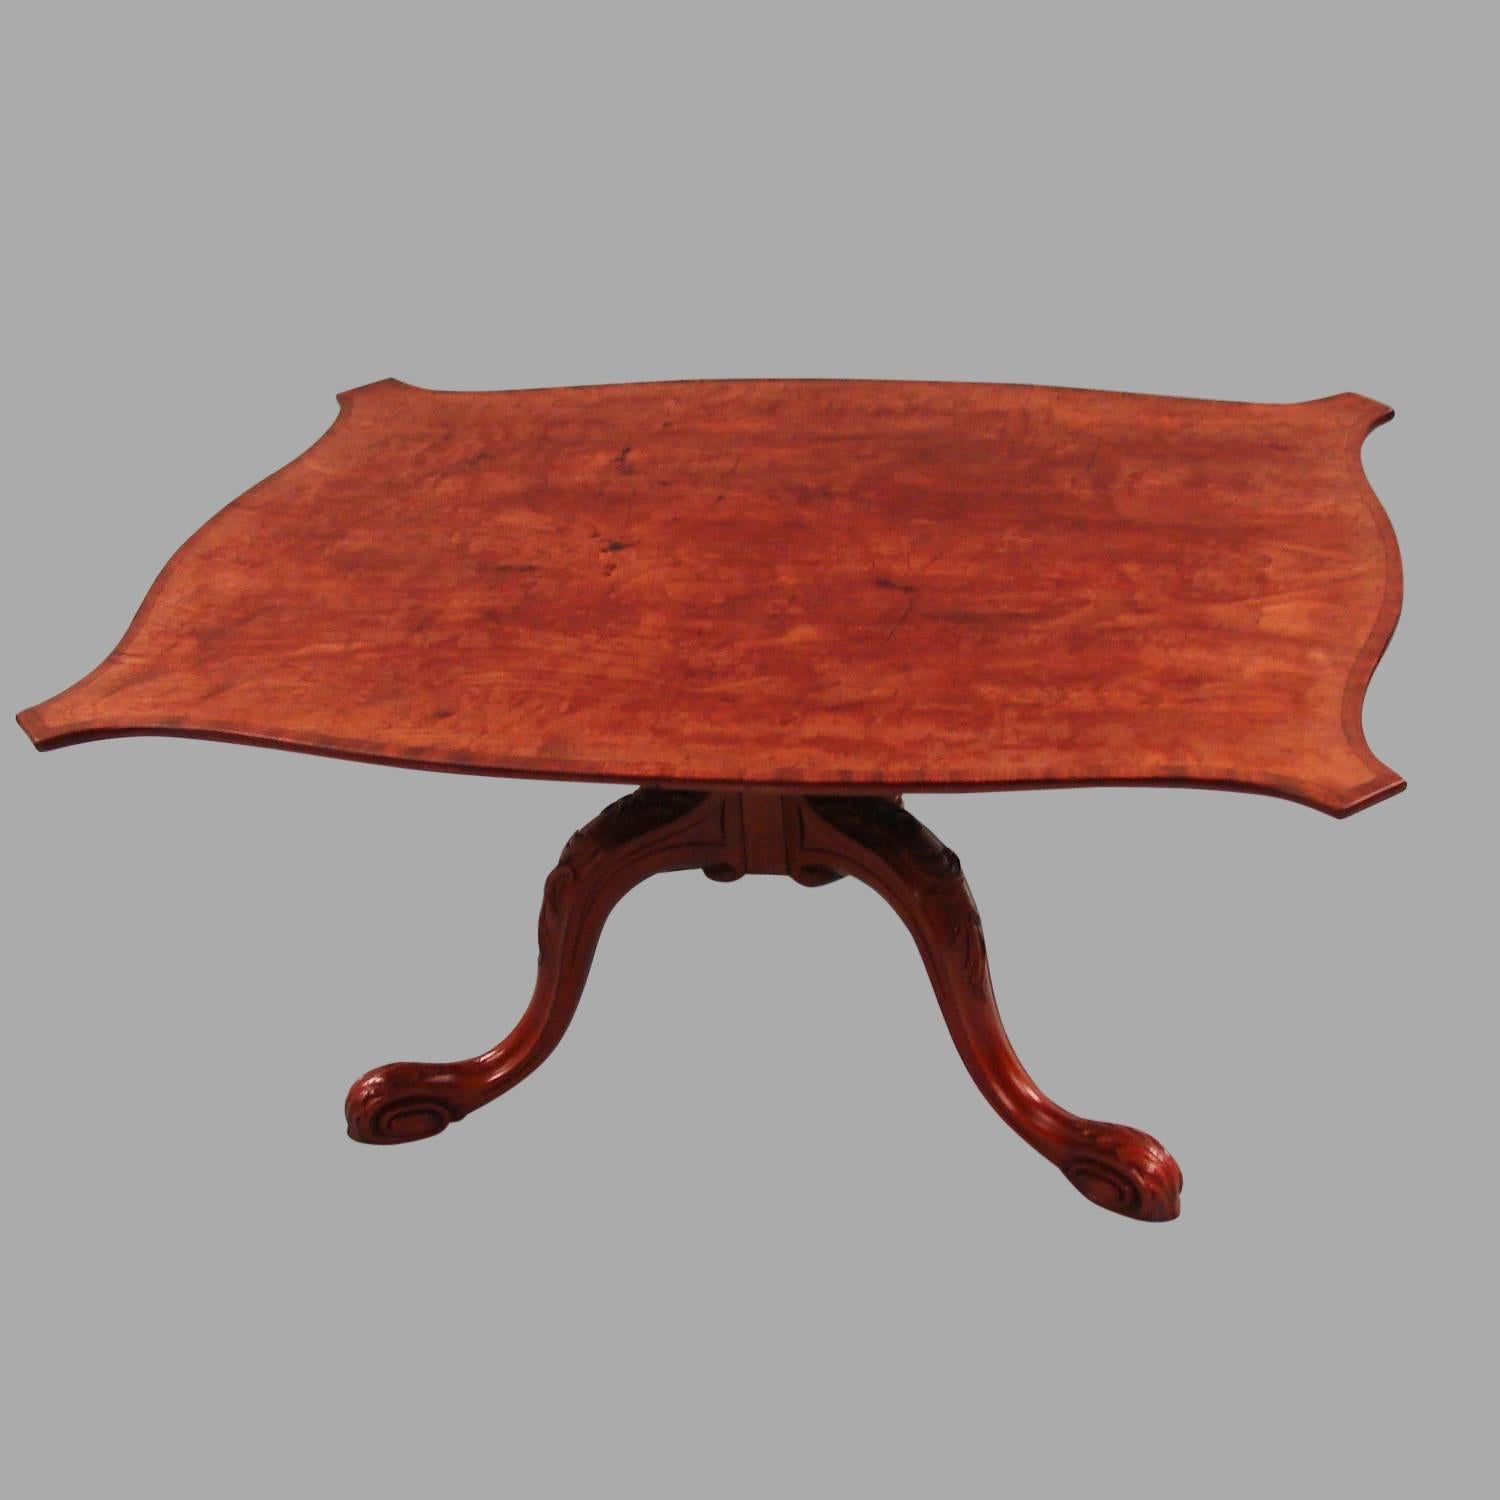 A George III inlaid mahogany tilt-top table, the serpentine form crossbanded top supported on a carved tripod base ending in pad feet. Reduced in height.